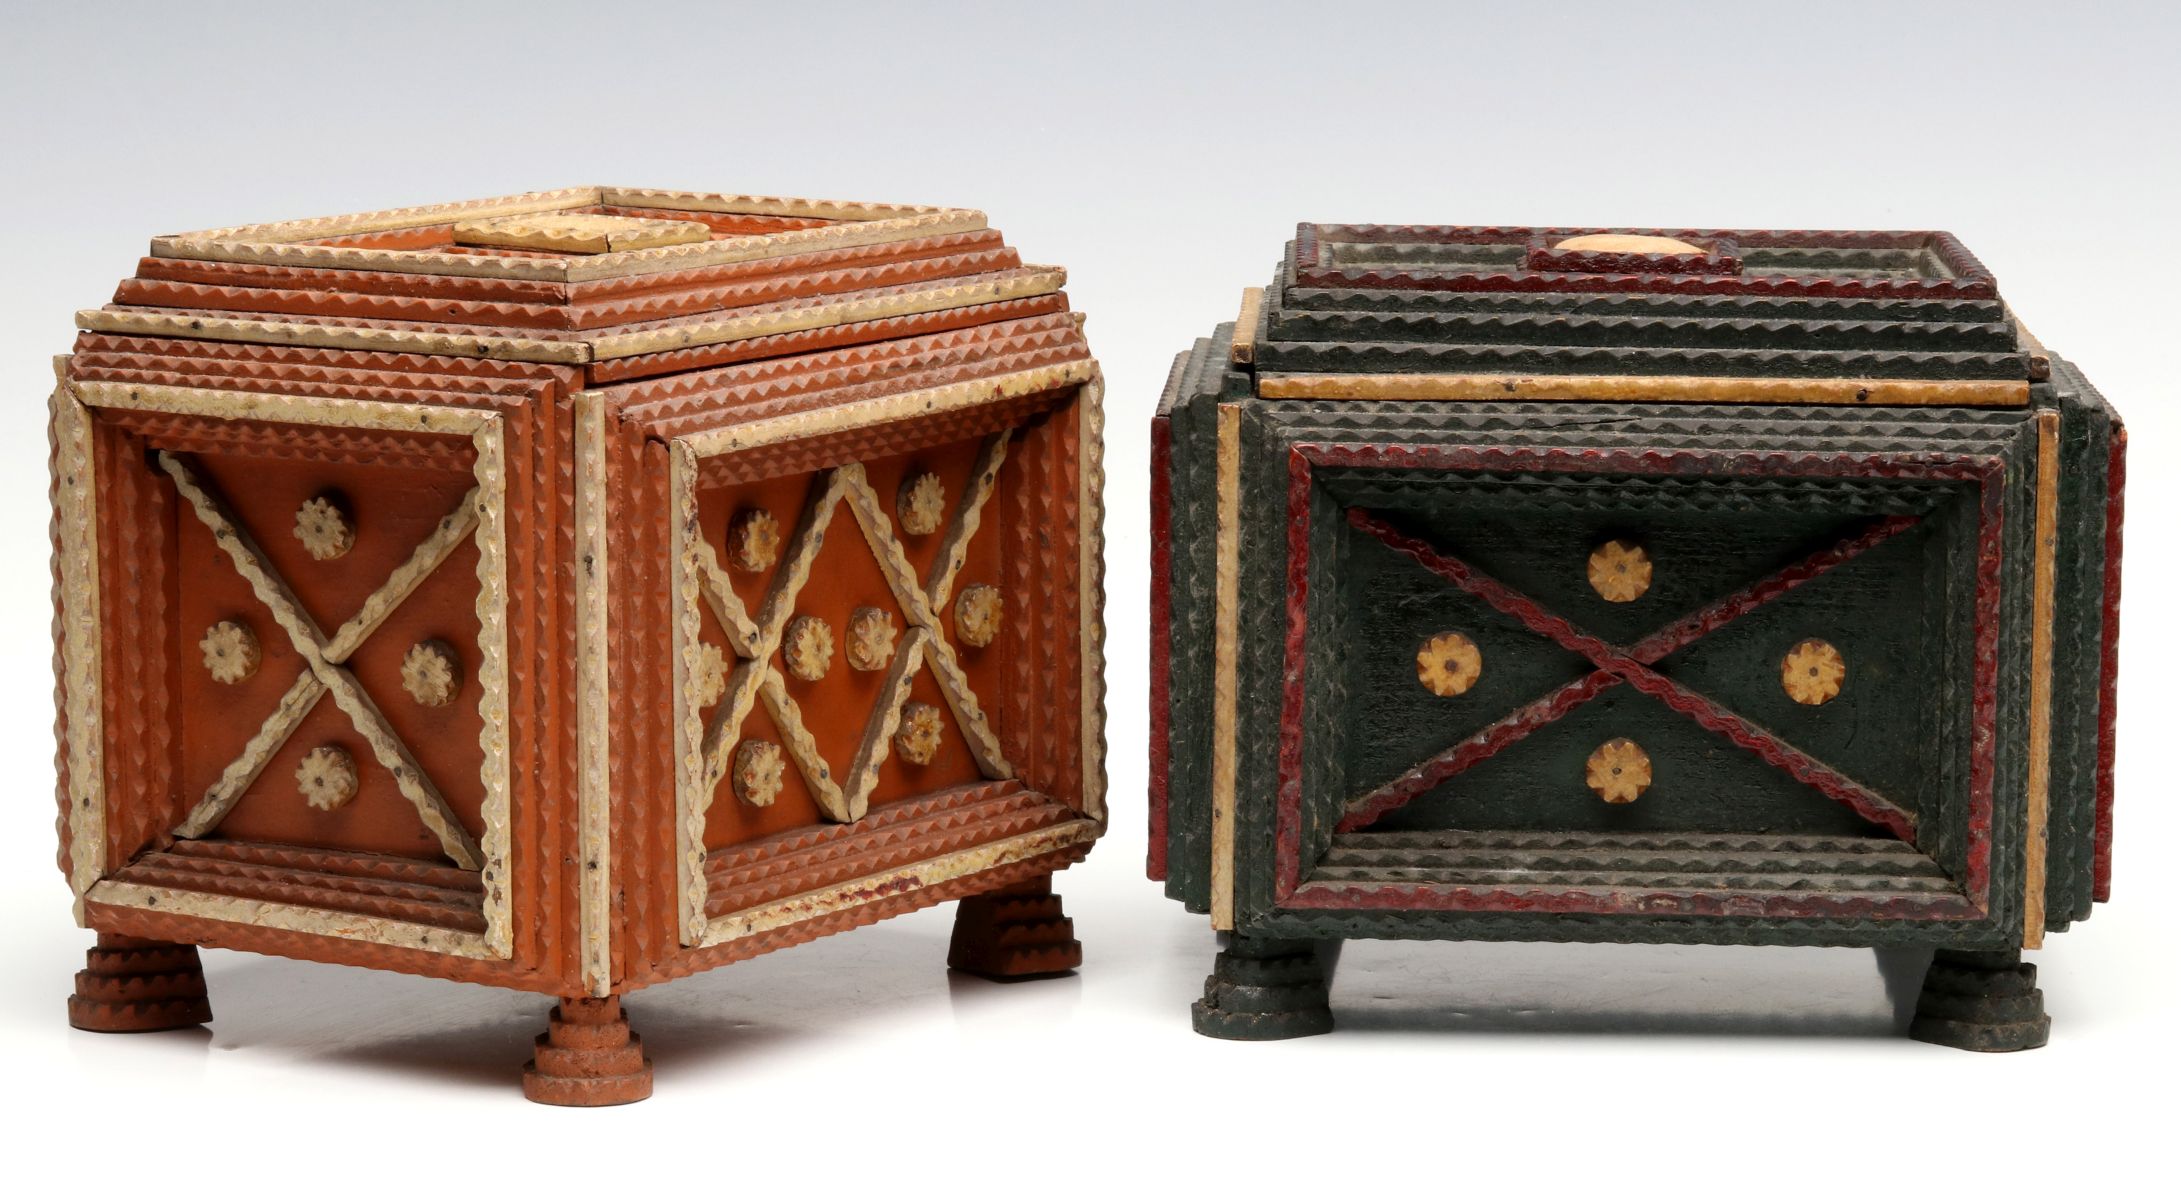 CIRCA 1910 TRAMP ART BOXES WITH OLD PAINT DECORATION